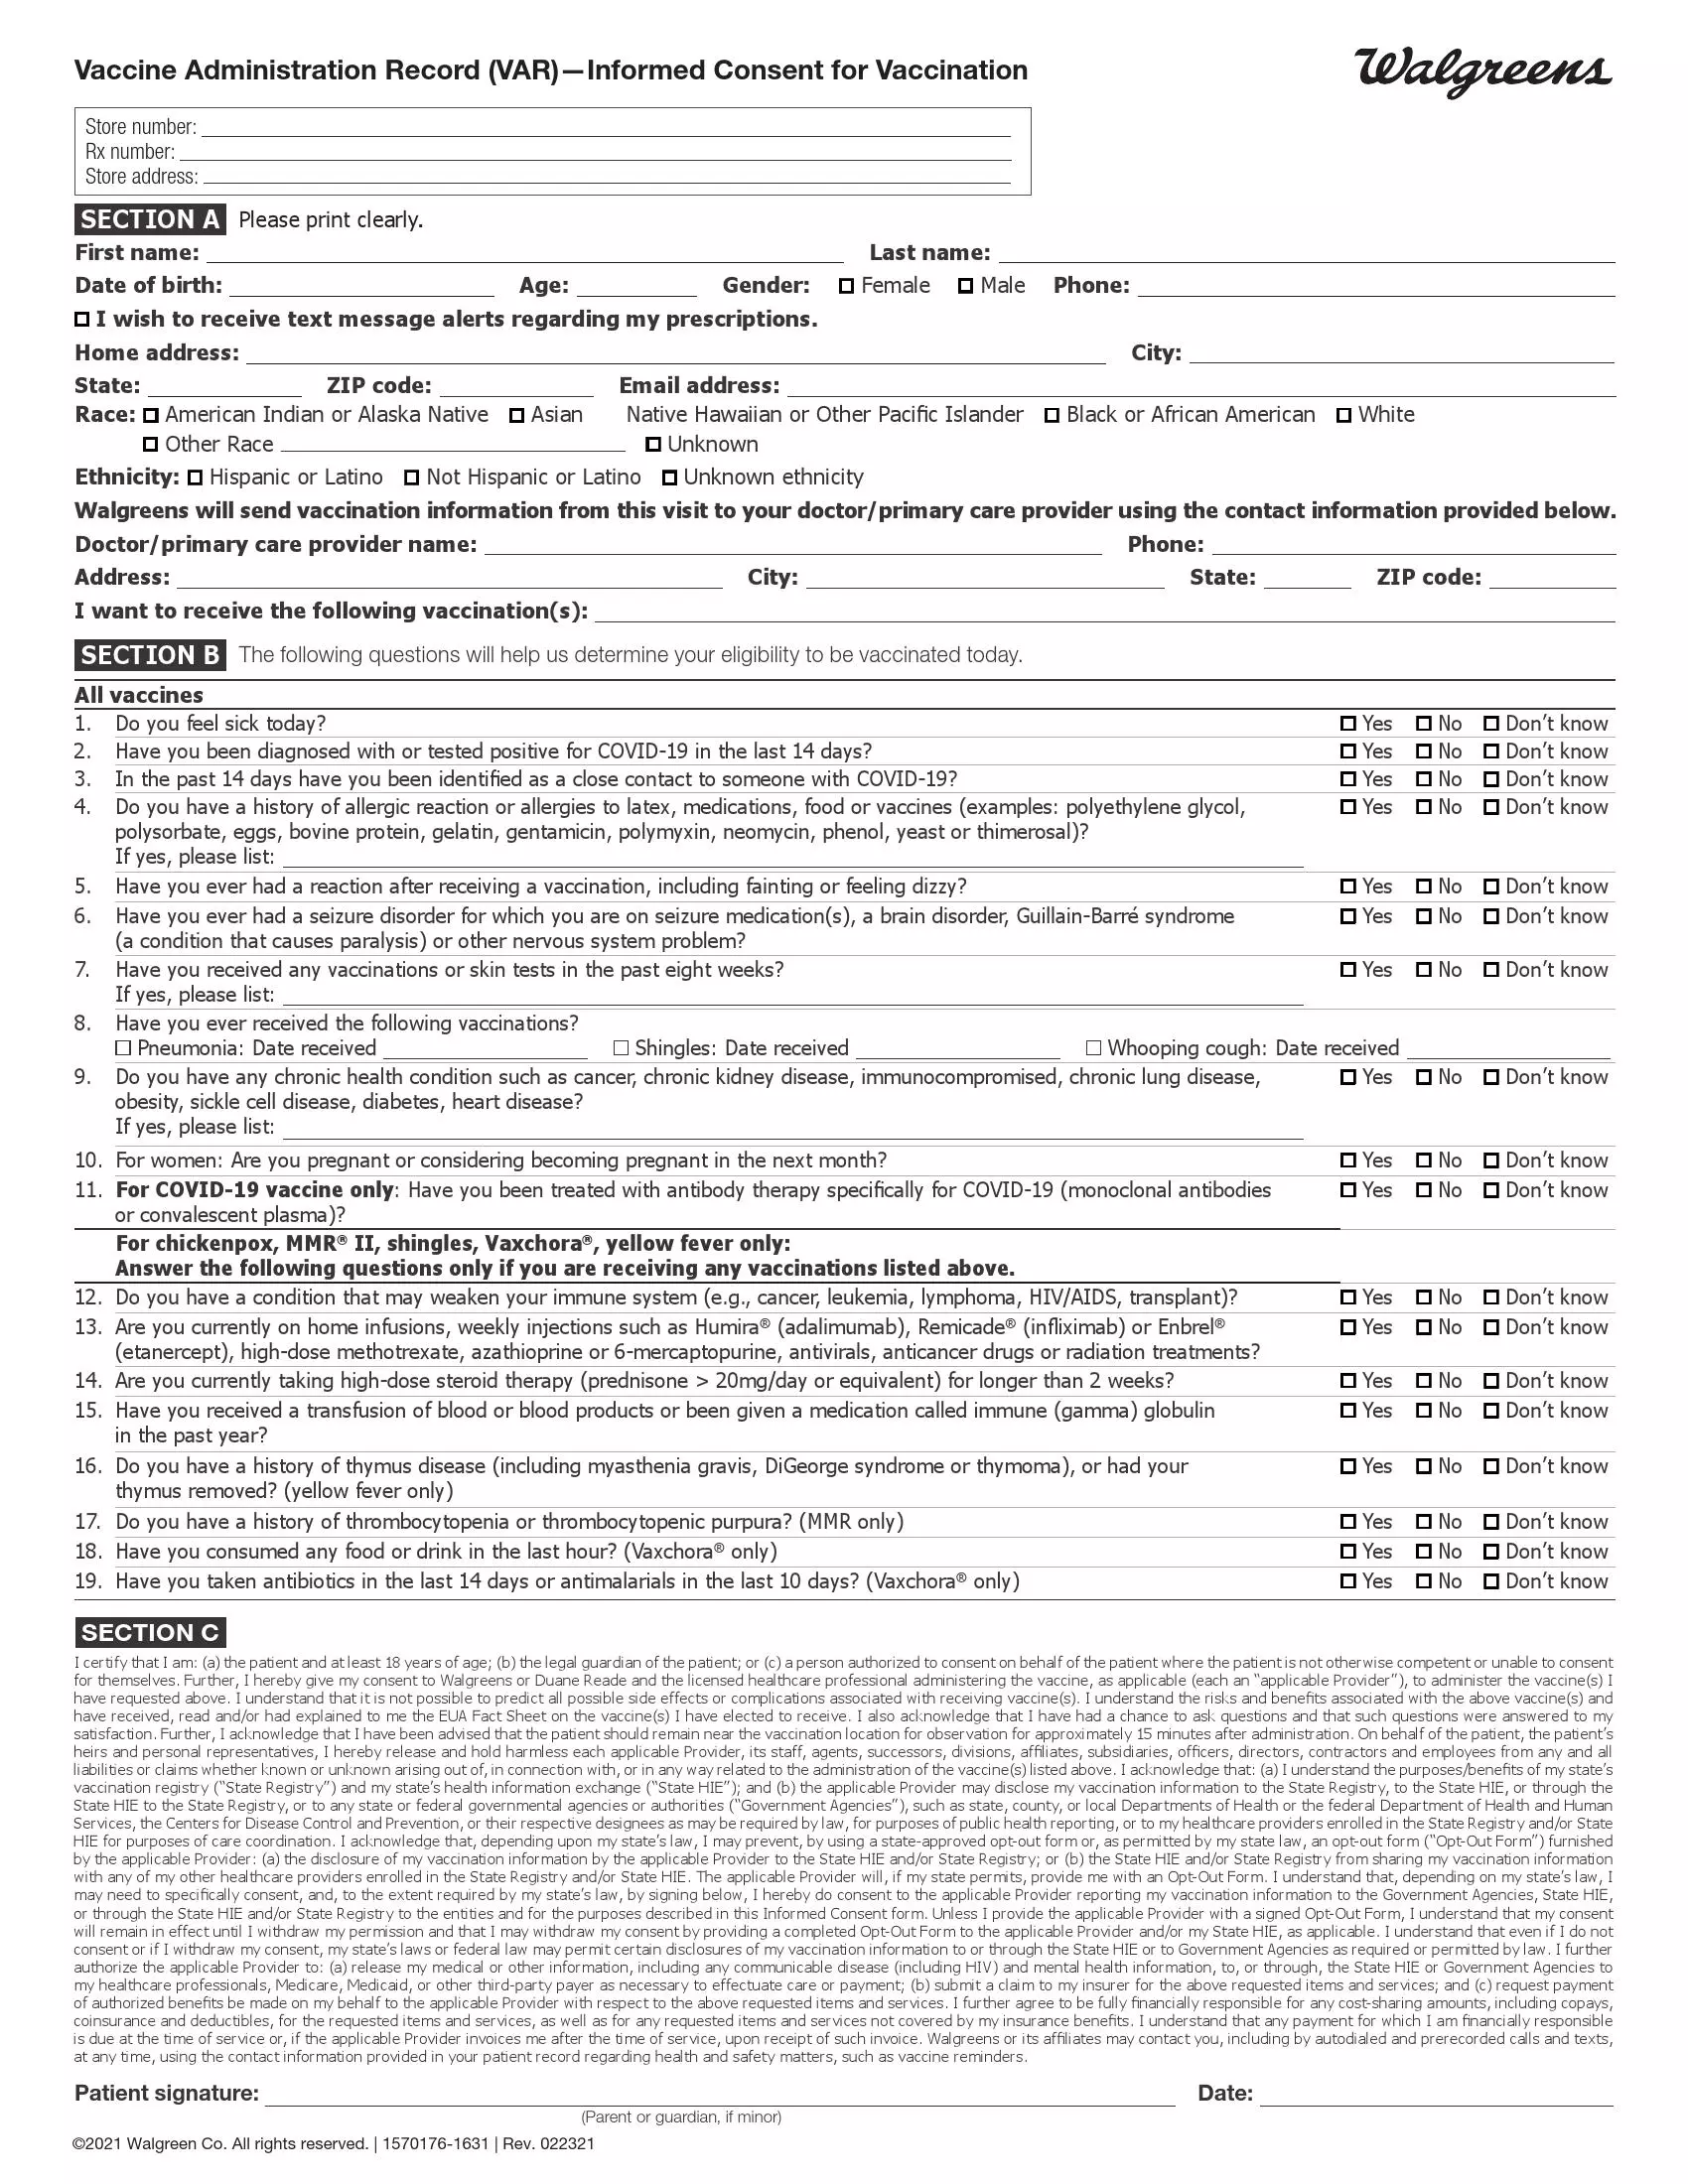 walgreens vaccination consent form preview